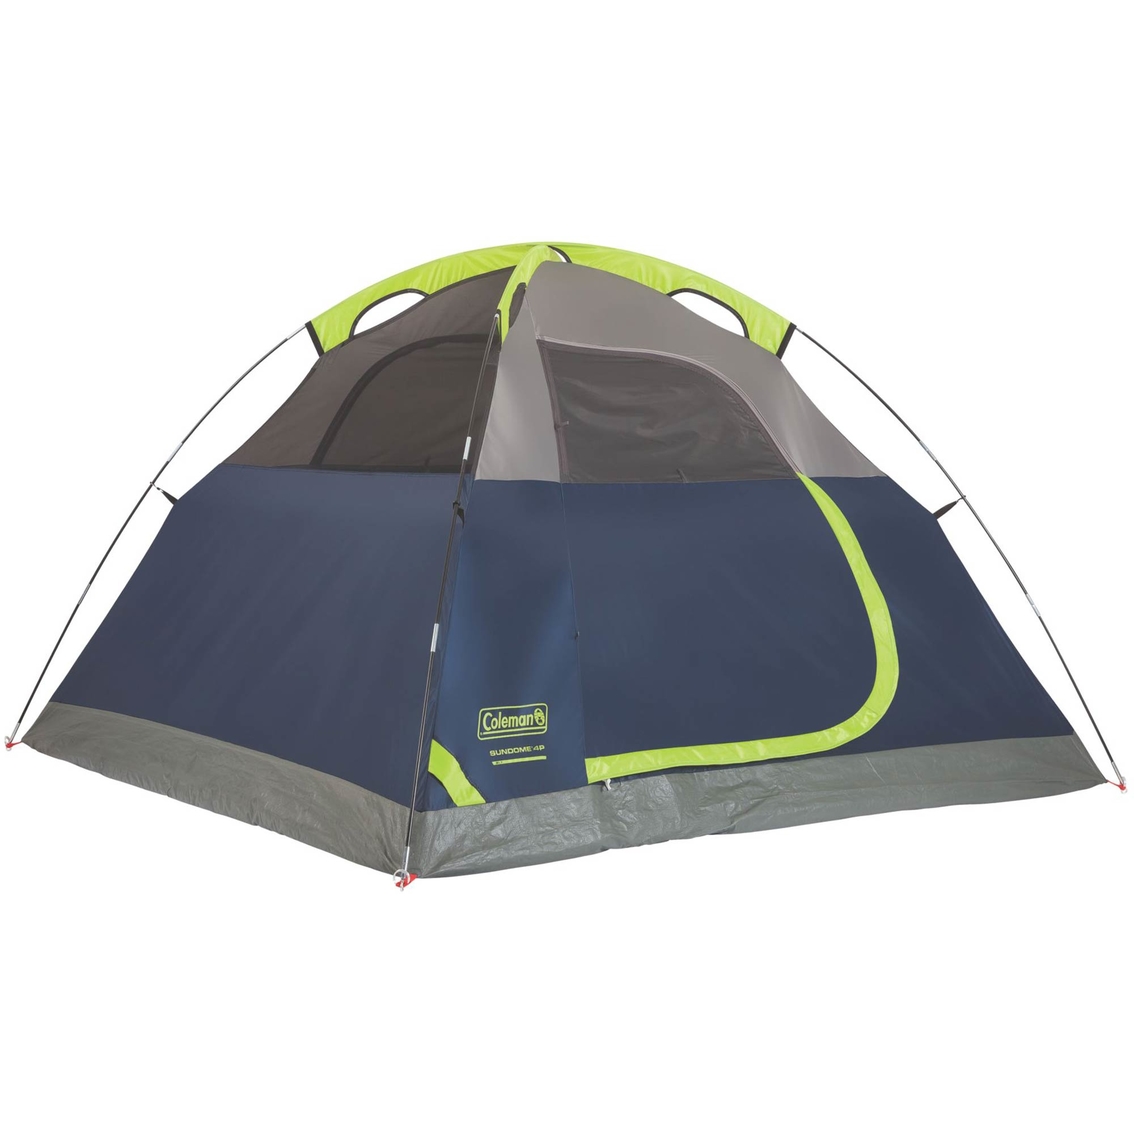 Coleman 9x7 4 Person Tent - Image 3 of 6